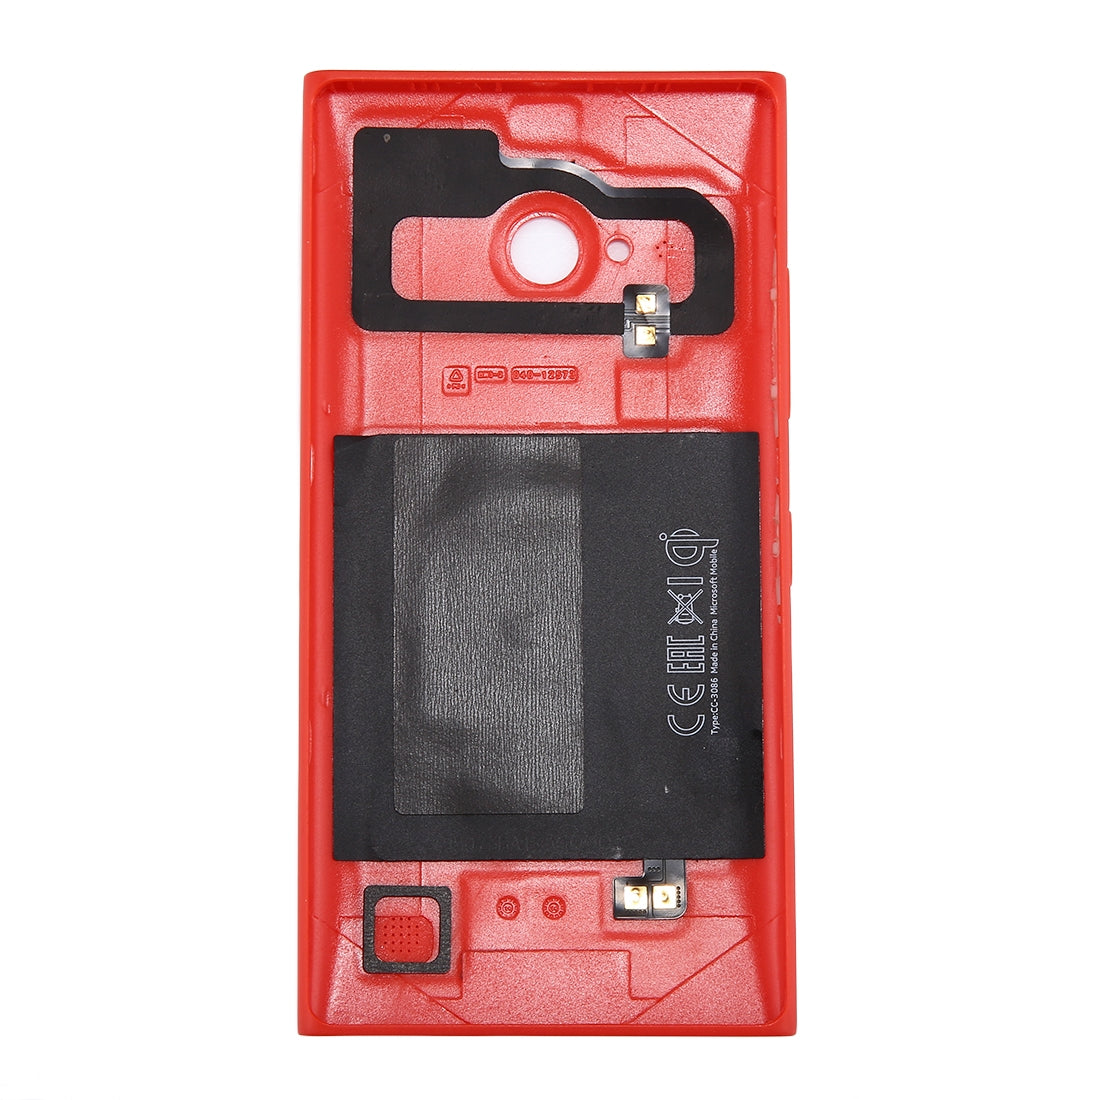 Battery Cover Back Cover Nokia Lumia 735 NFC solid color Red